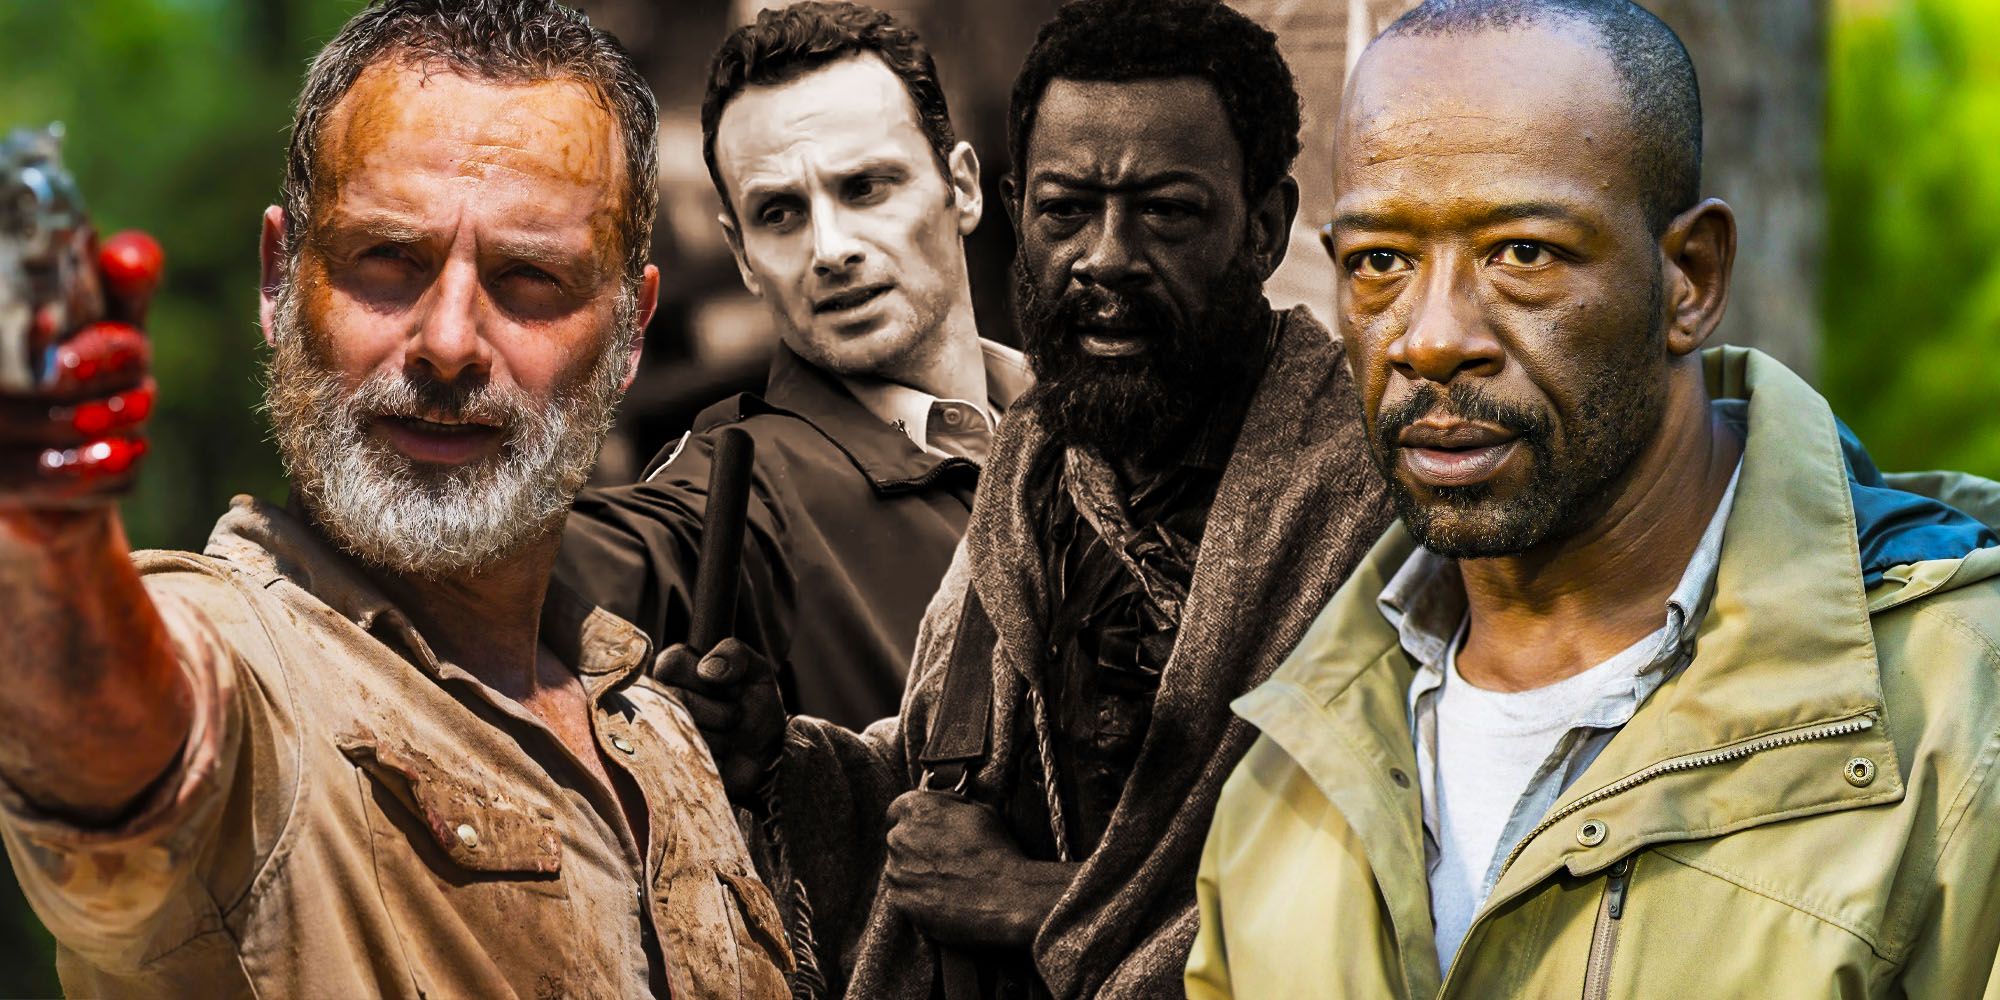 Walking Dead Confirms How Many Years Have Passed In TWD Timeline